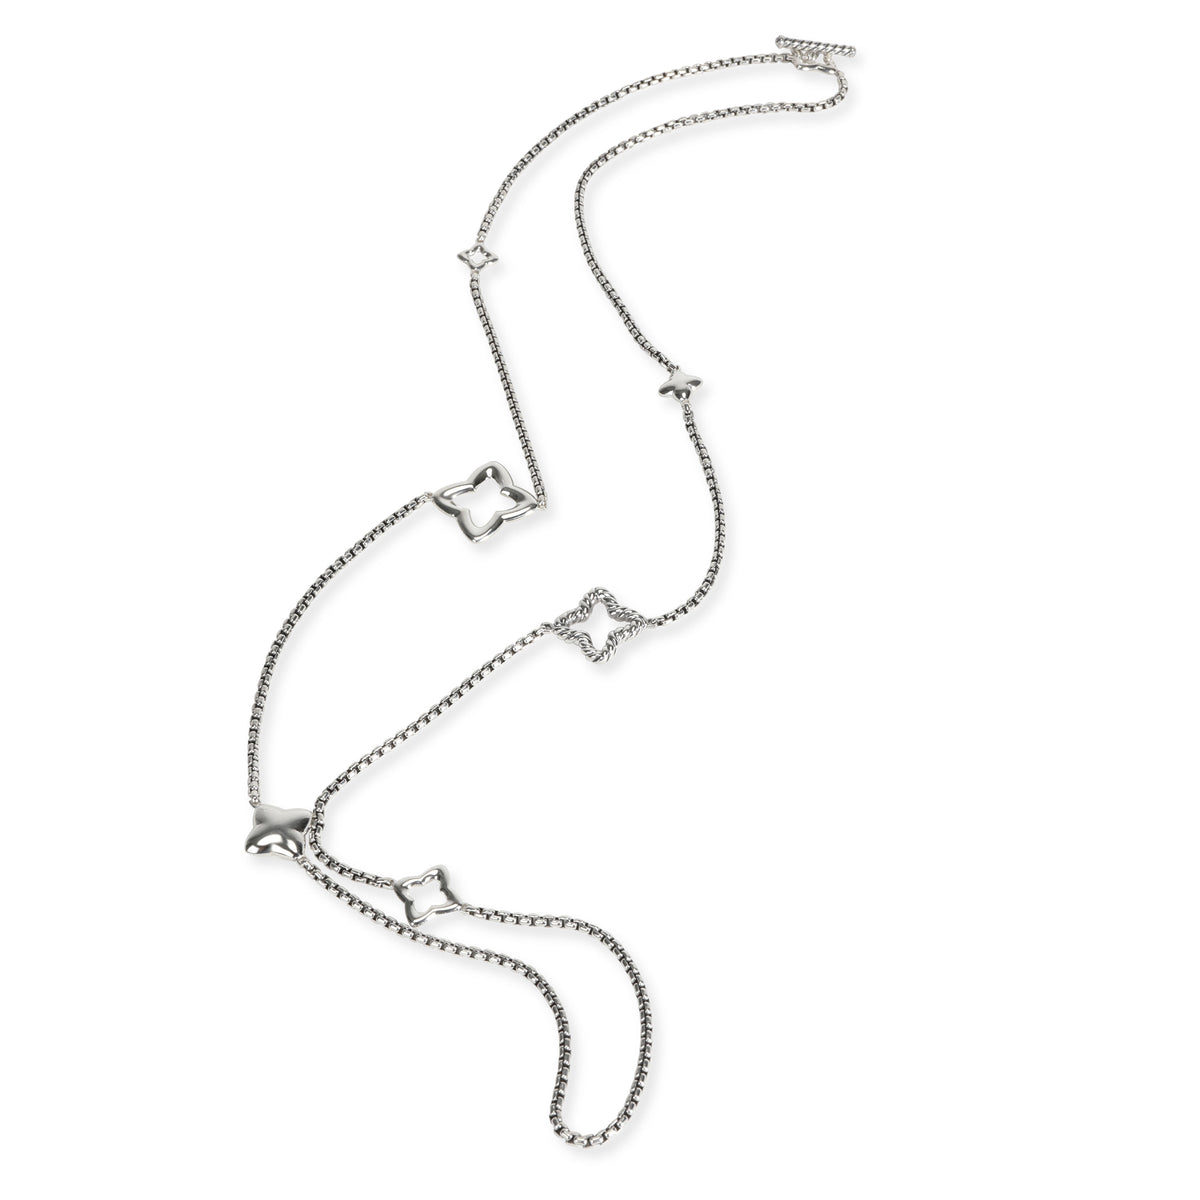 David Yurman Chain Collection Necklace in  Sterling Silver